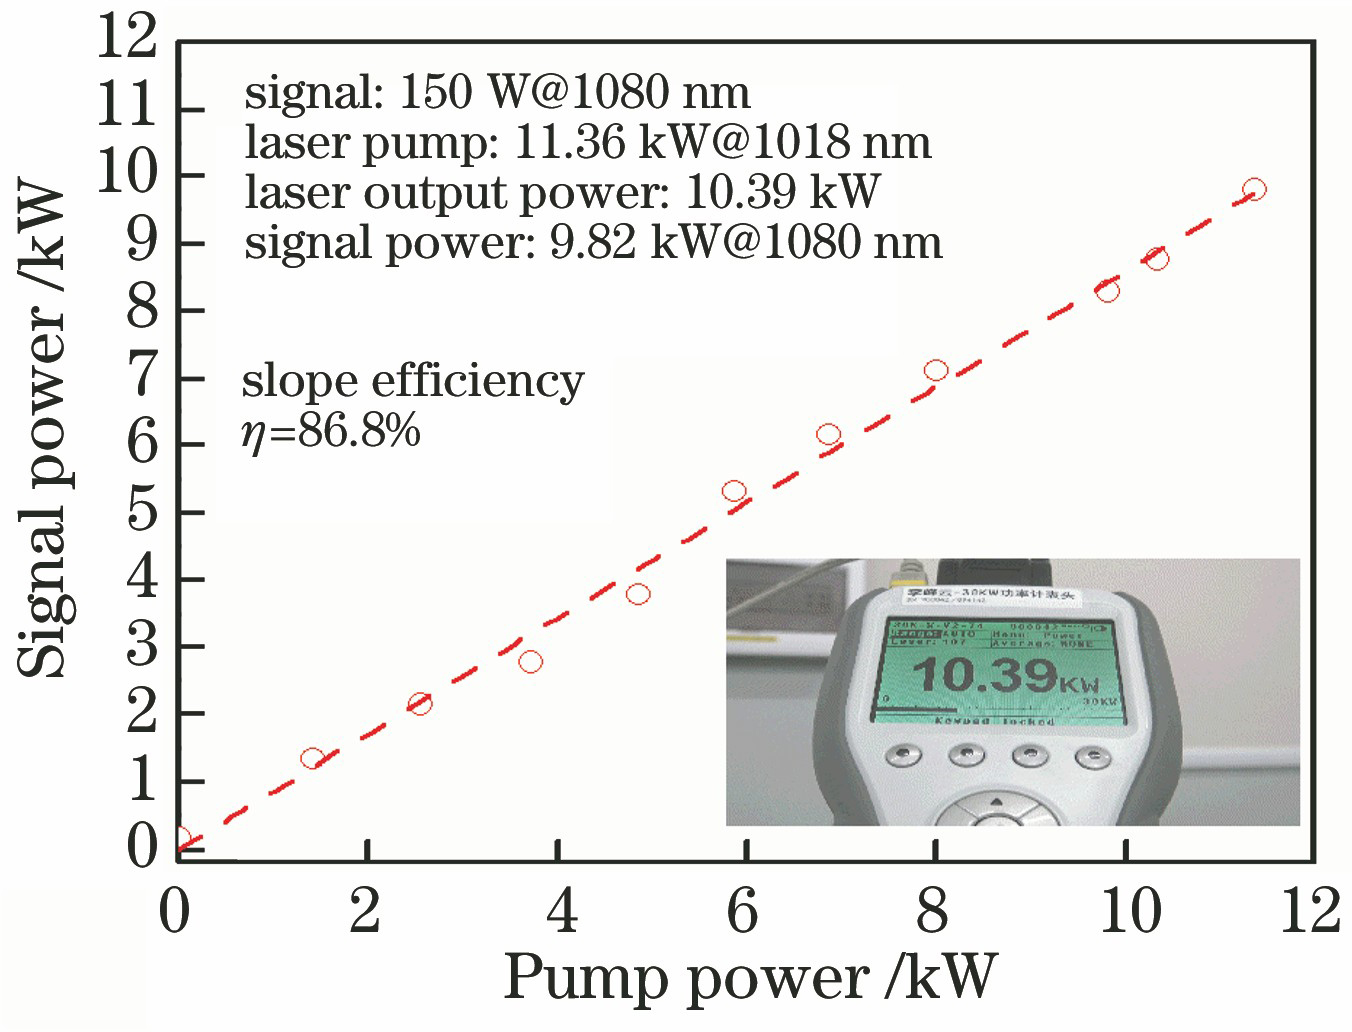 Curve of total laser output power